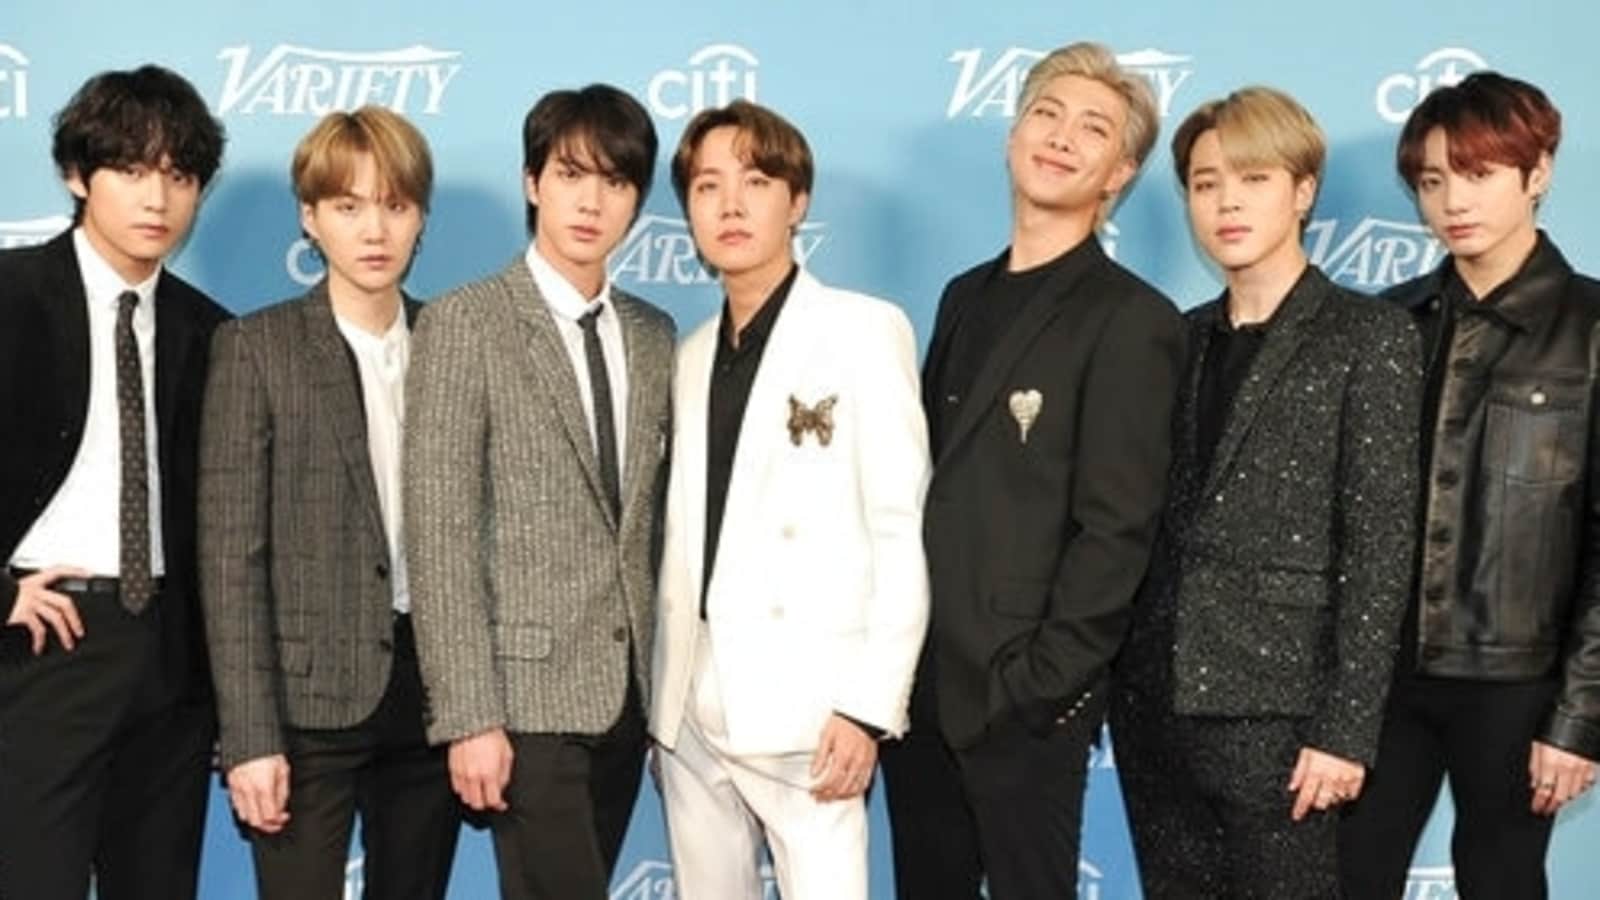 BTS’ agency to pay for extra expenses, clarifies about budget issues ahead of World Expo 2030 Busan Concert